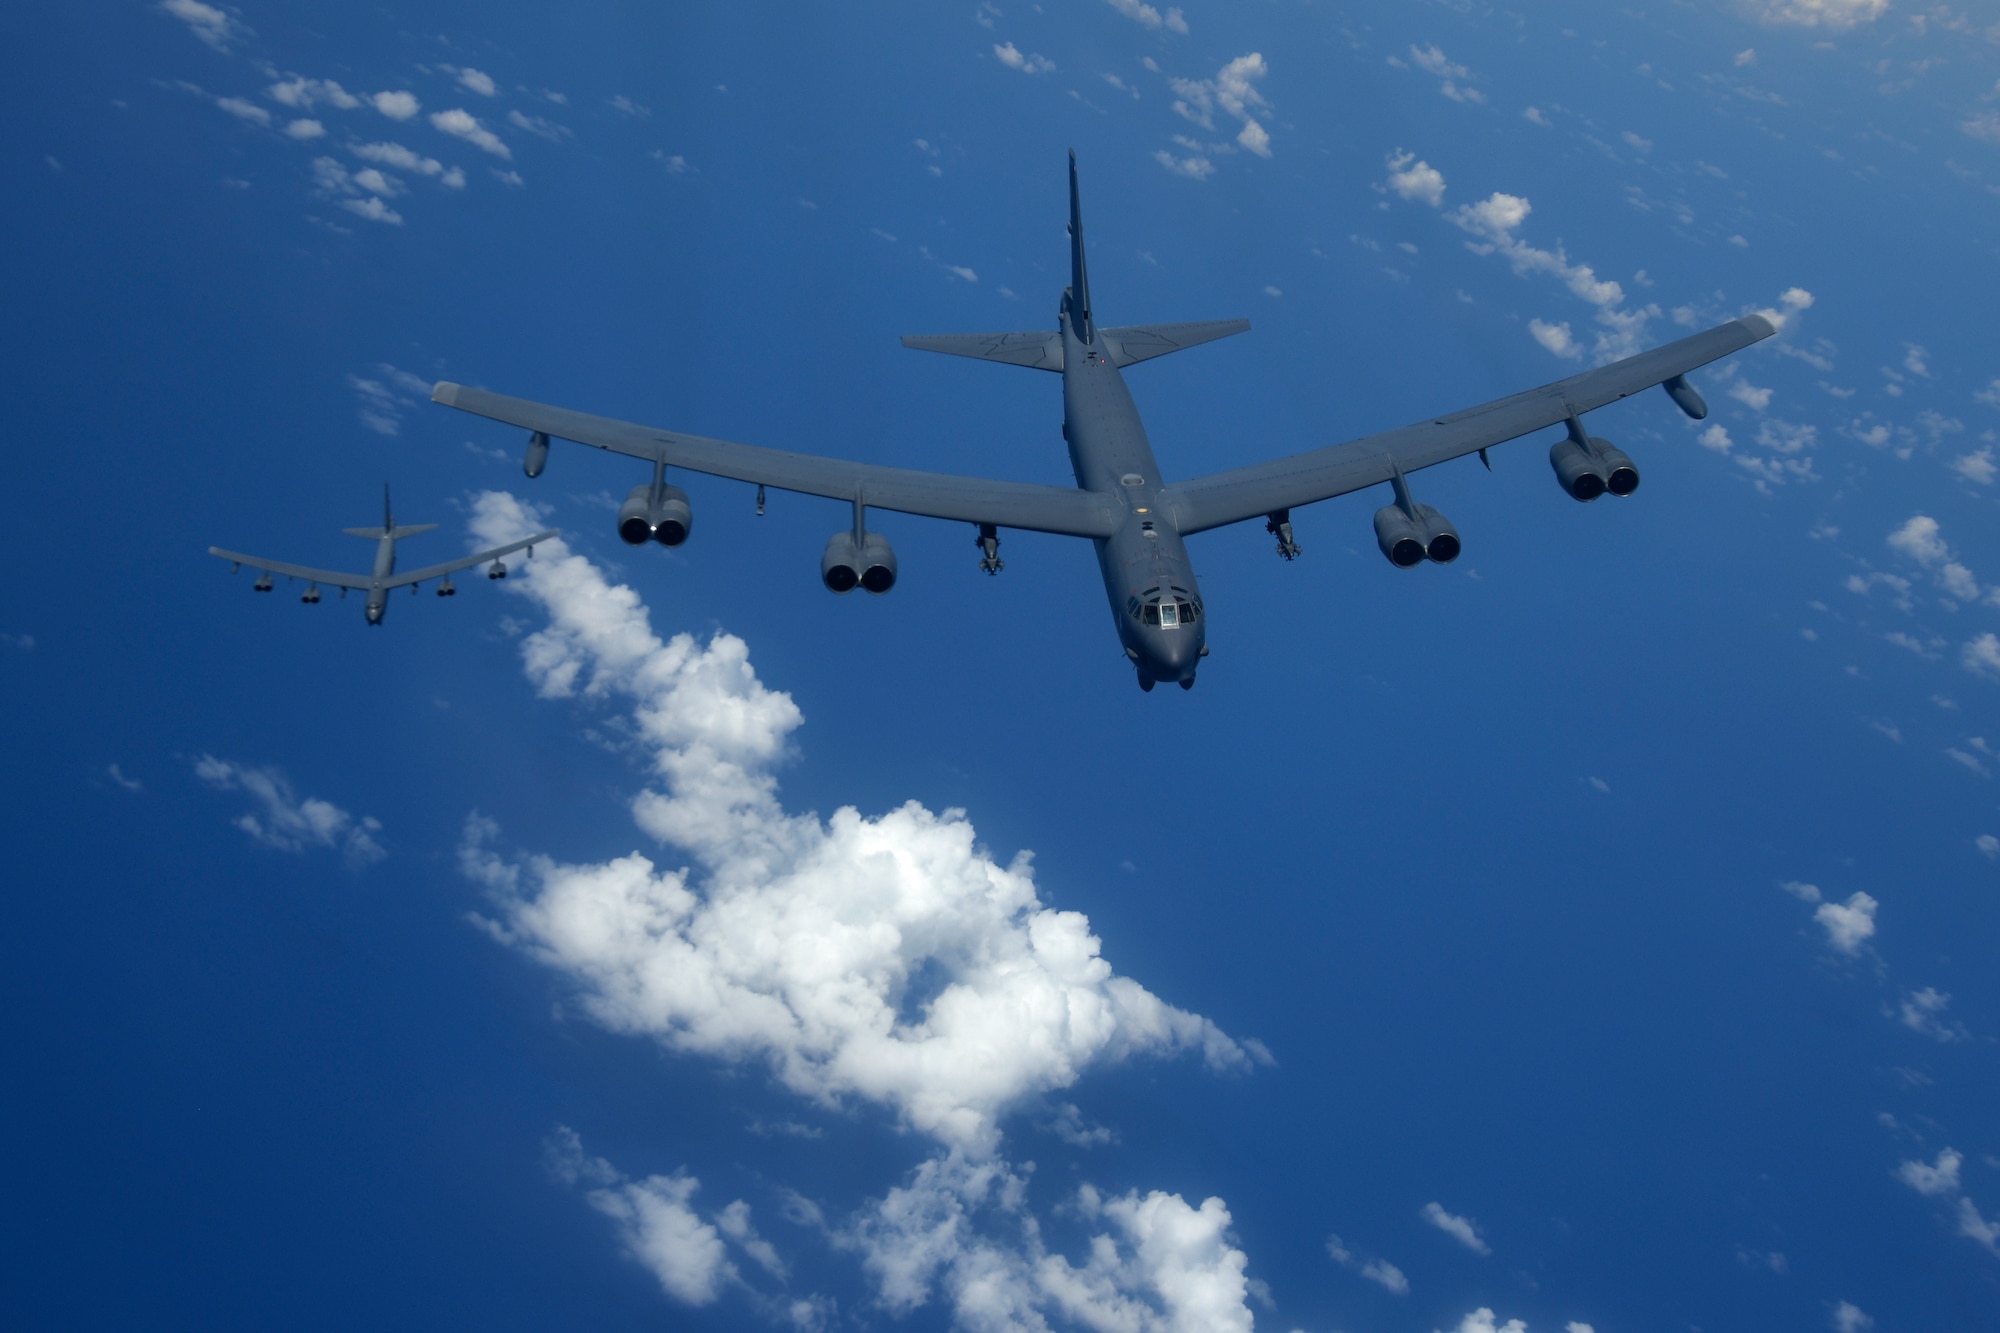 Two U.S. Air Force B-52H Stratofortress bombers fly over the Pacific Ocean during a routine training mission Aug. 2, 2018. This mission was flown in support of U.S. Indo-Pacific Command’s Continuous Bomber Presence operations, which are a key component to improving combined and joint service interoperability. (U.S. Air Force photo by Airman 1st Class Gerald R. Willis)